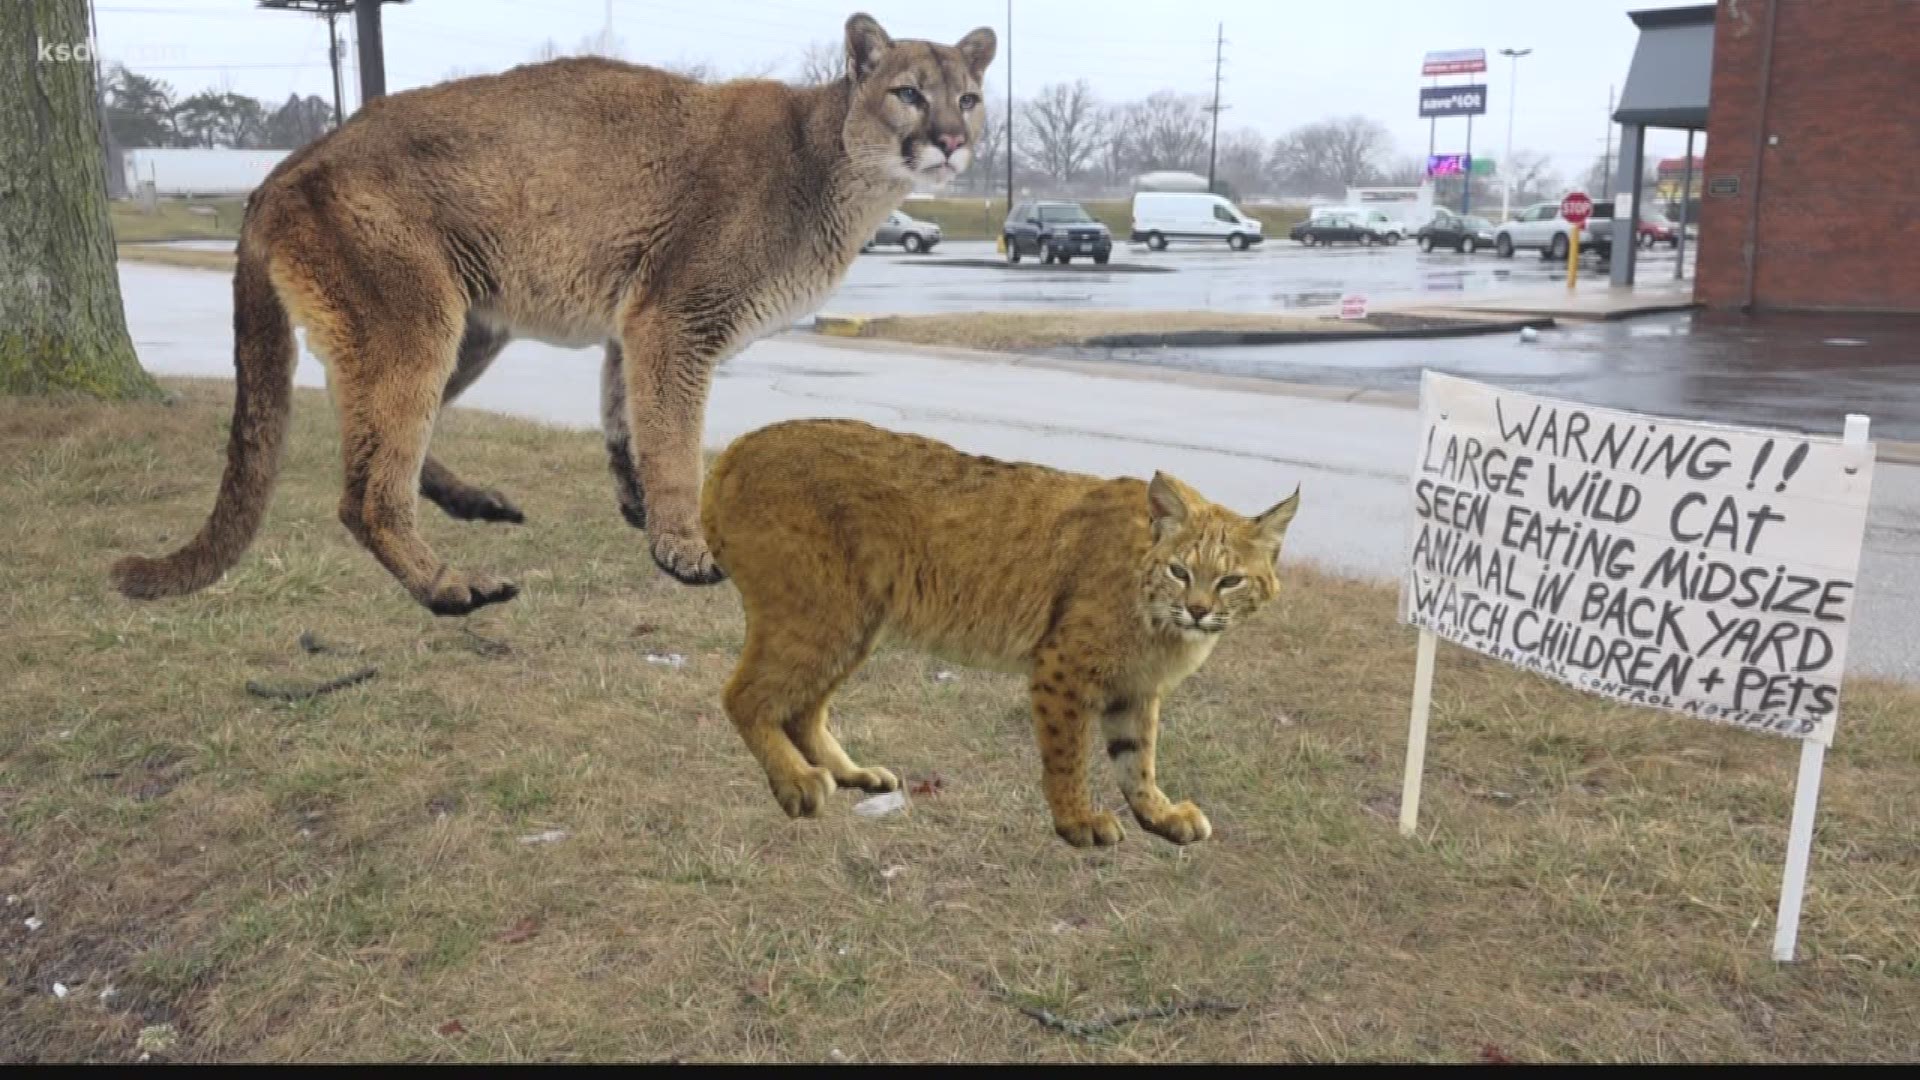 There have been 74 confirmed cougar sighting in Missouri since 1994, but to really know if a mountain lion could make its way to St. Charles I asked a professional.